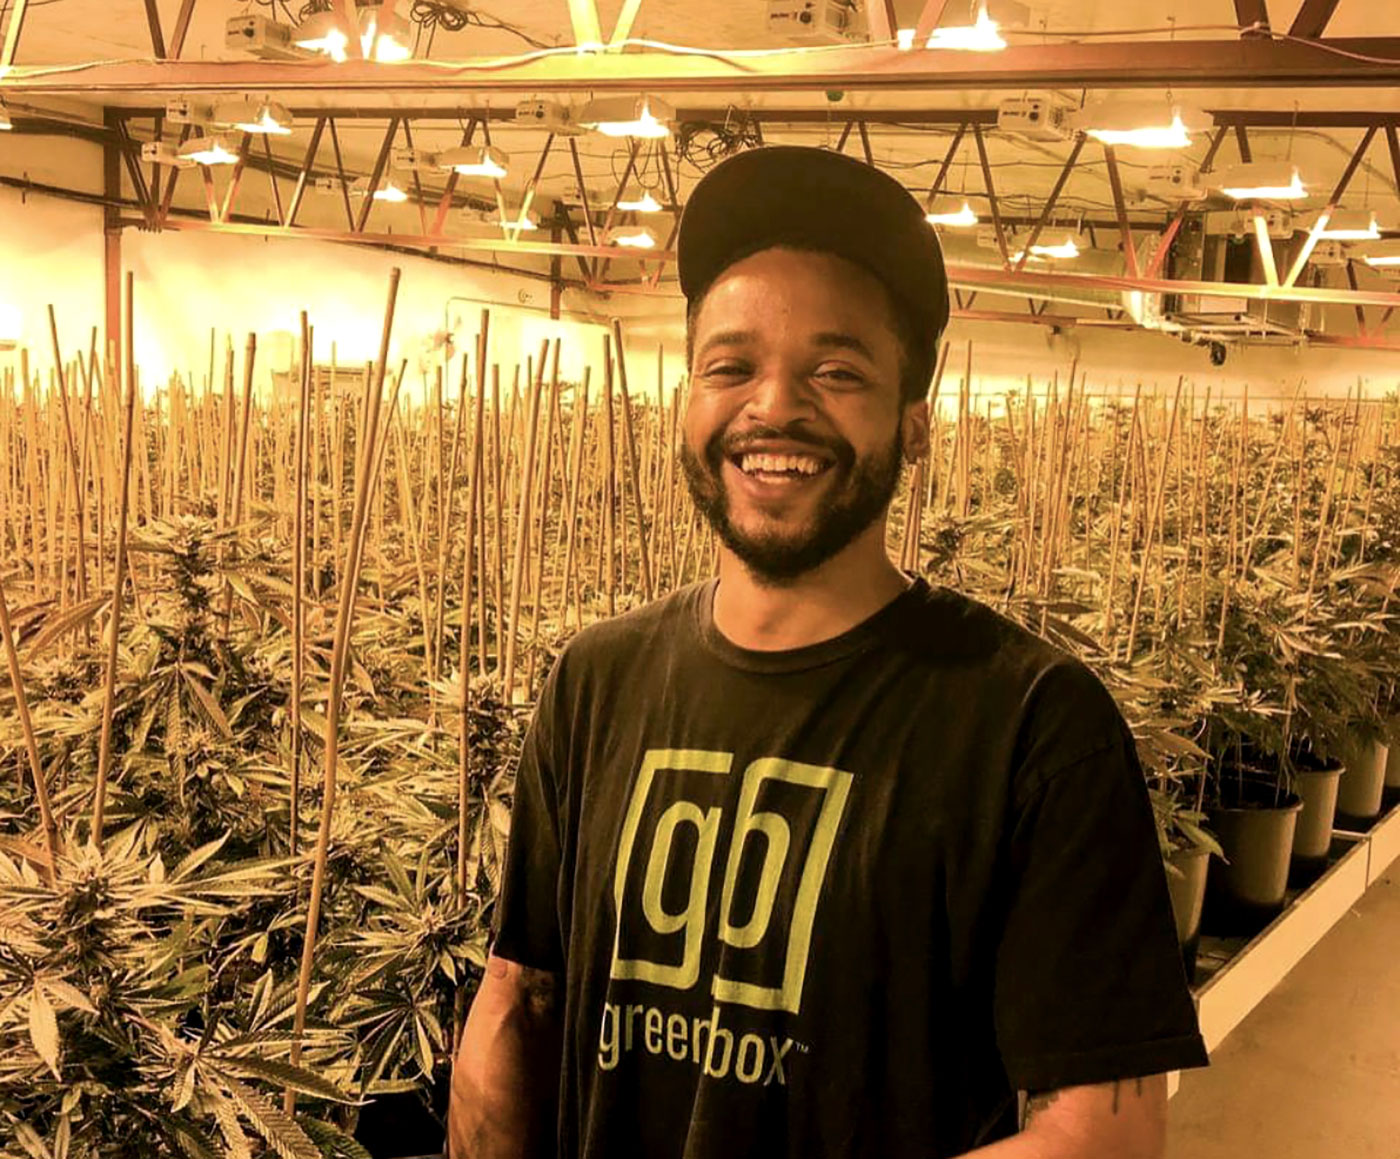 Adrian Wayman, founder of Green Box, at a supplier's indoor grow. Wayman was awarded a $30,000 grant from the city to help bolster his marijuana delivery business. Photo from Green Box.